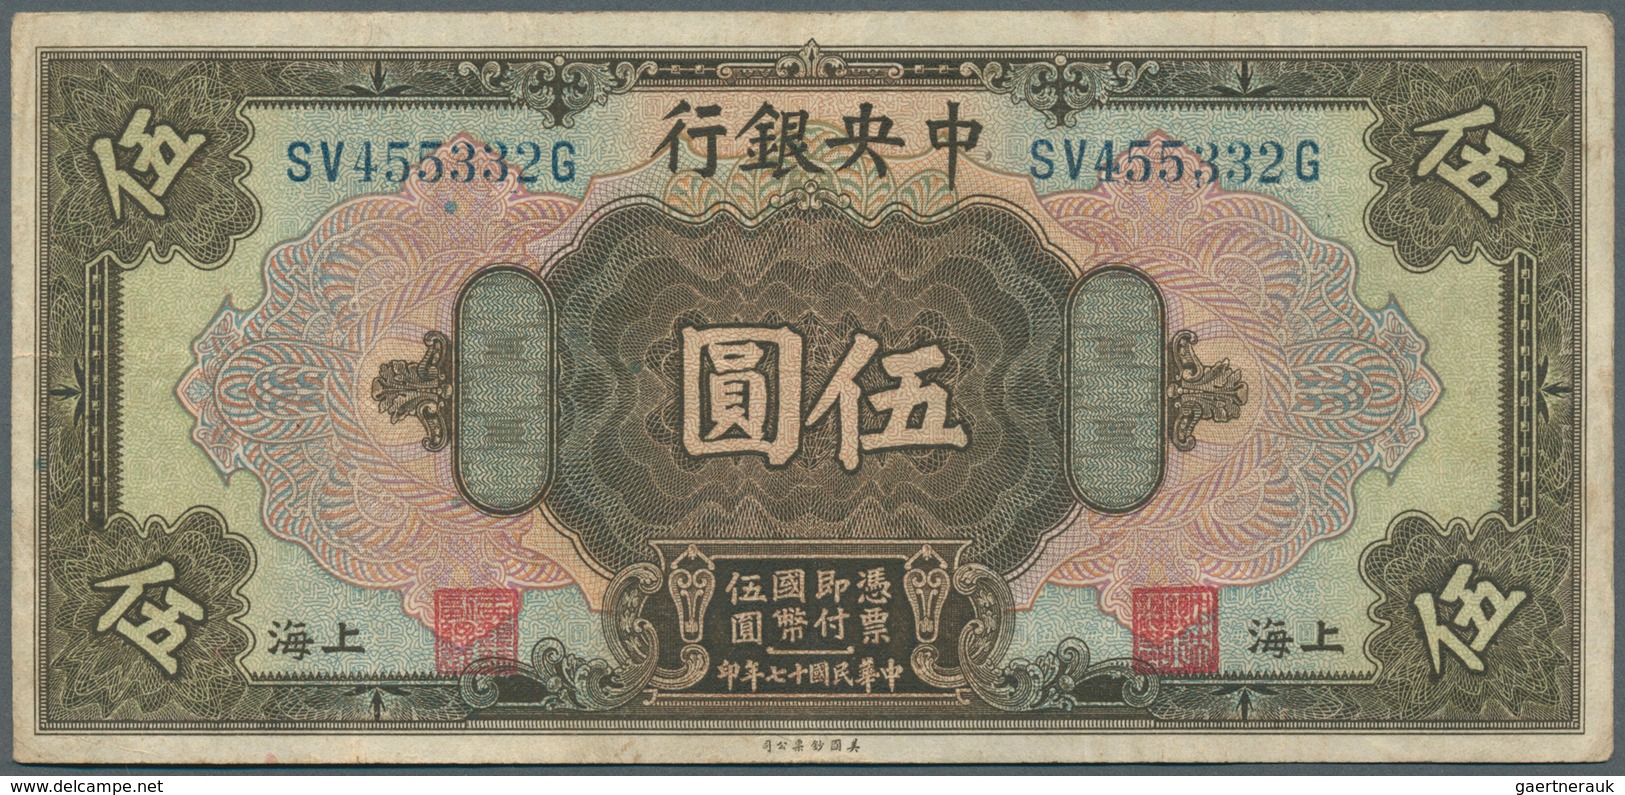 01292 China: 5 Dollars 1928 The Central Bank Of China P. 196d, Used With Several Folds But Still Strong Pa - China